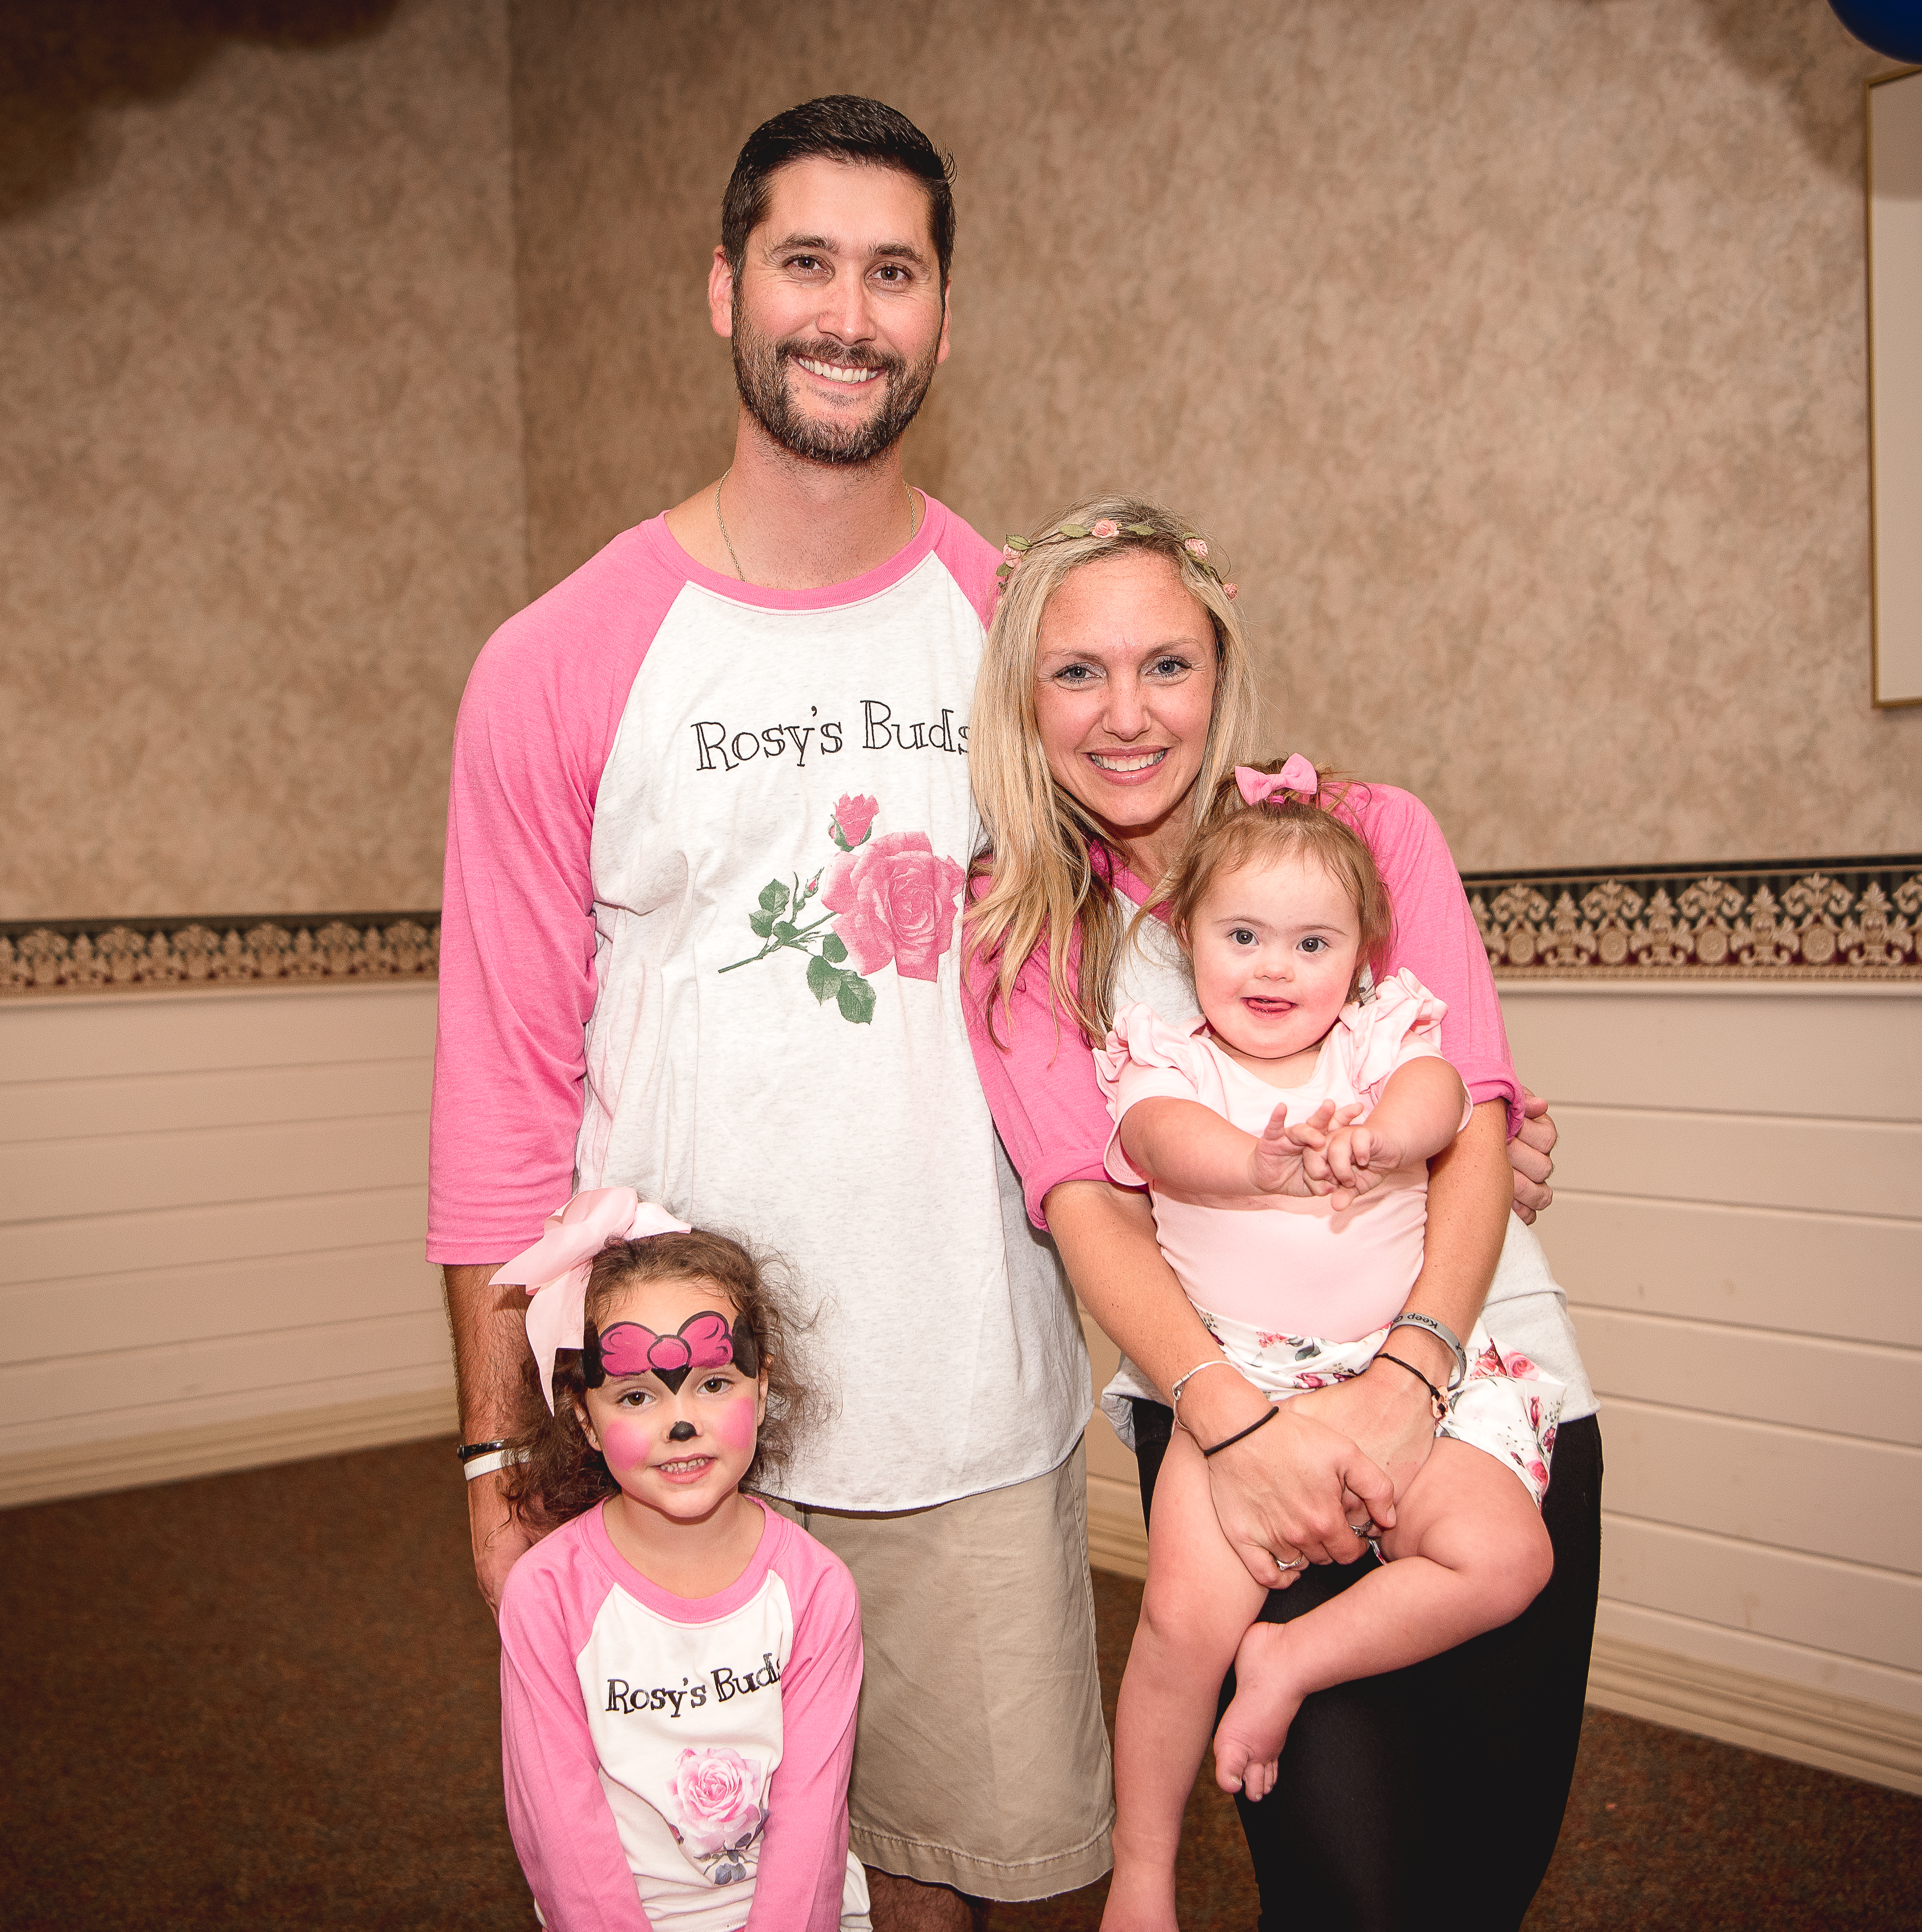 Two members of the NHDSA smiling with their kids and wearing matching "Rosy's Buds" t-shirts